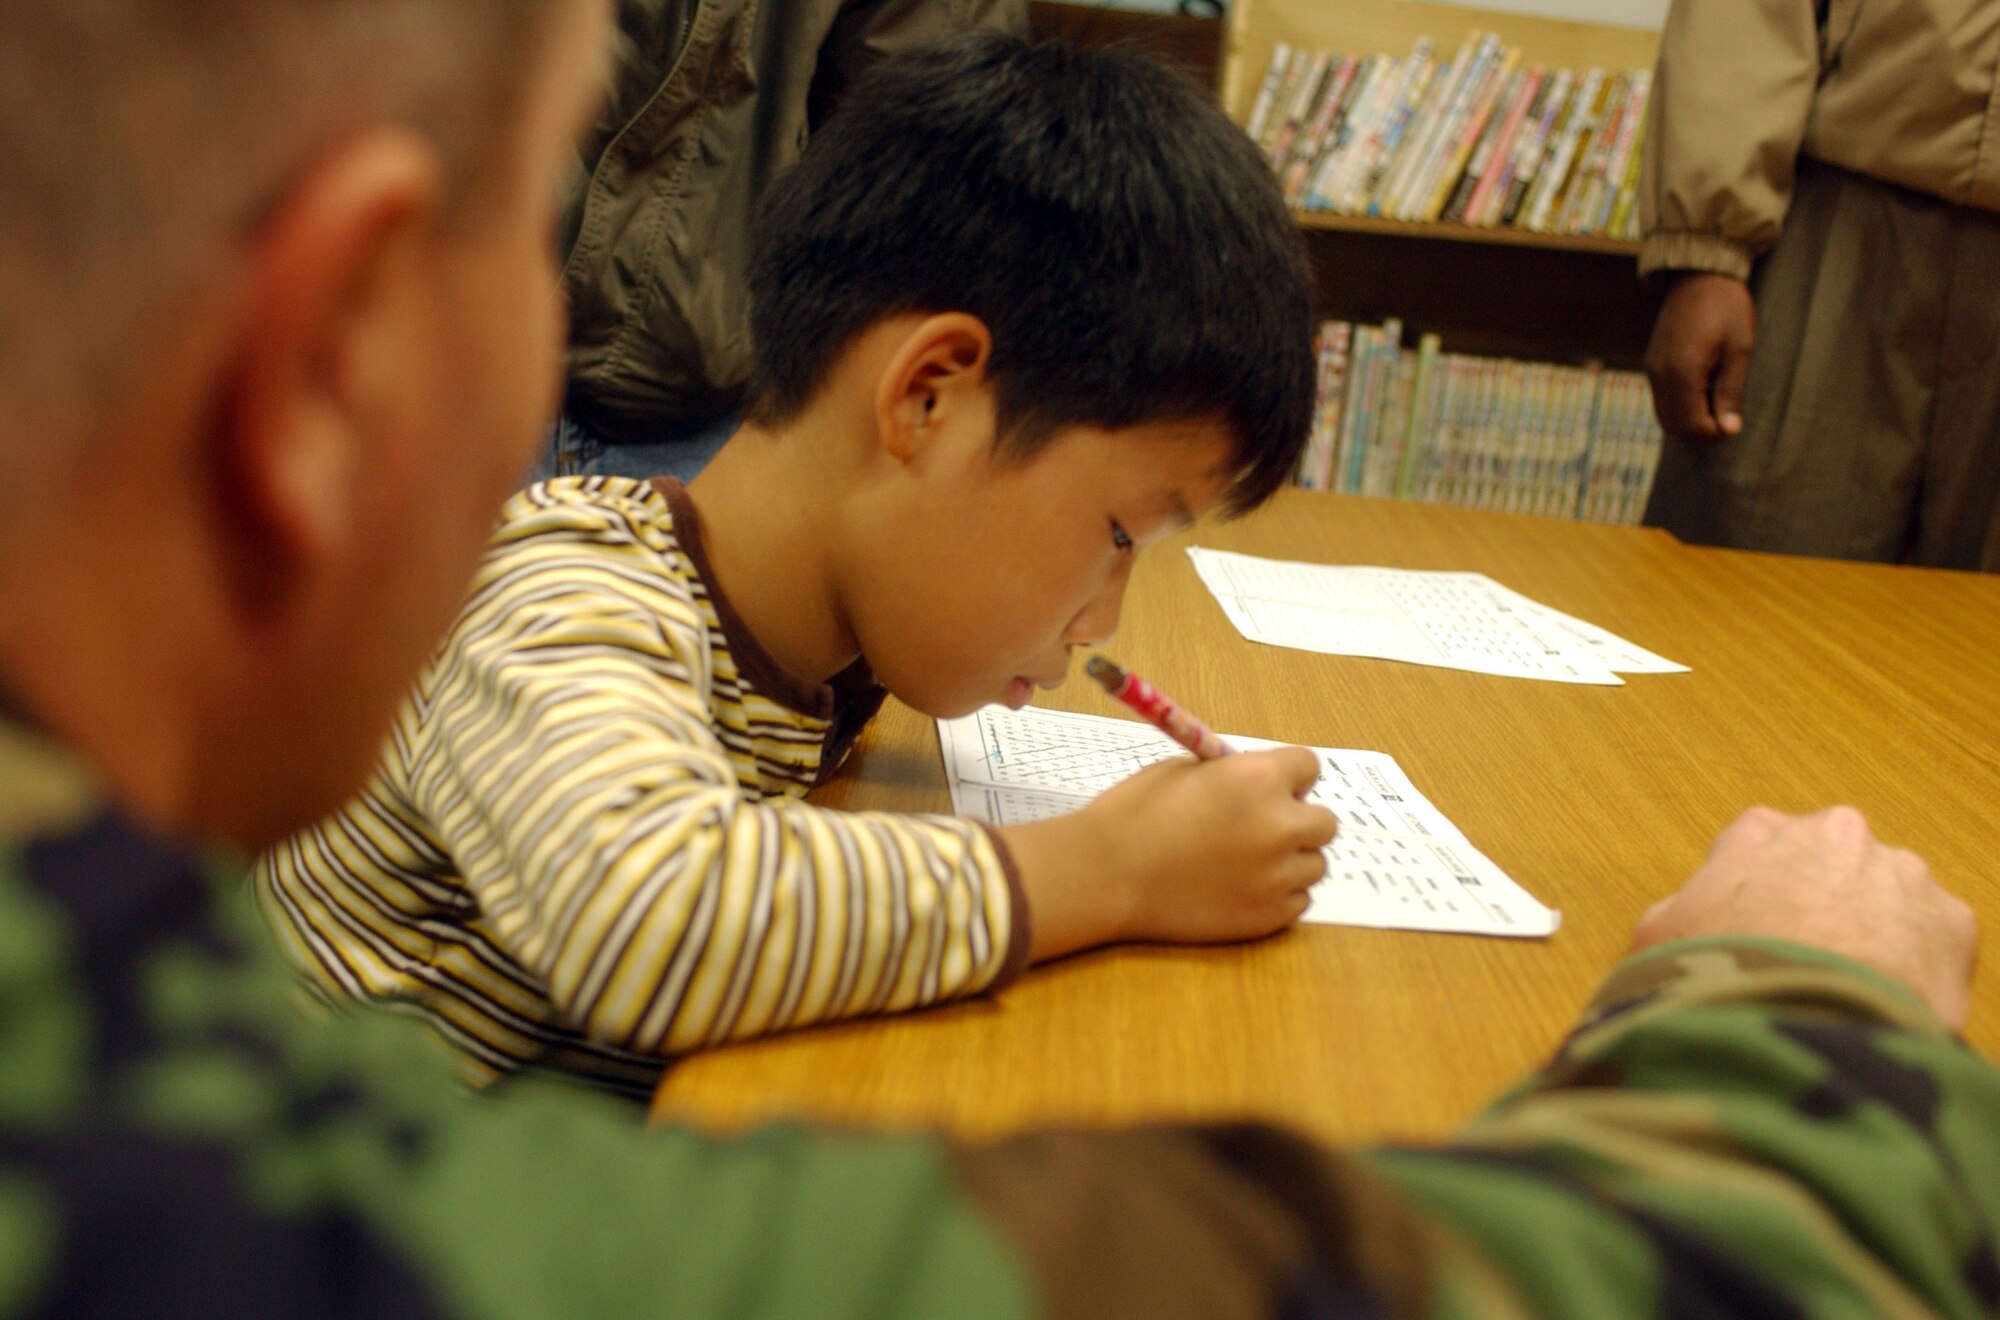 Gunsan City, South Korea -- A child searches for a word during his English class as Maj. Richard Fitzgerald, 8th Fighter Wing Chaplain, assists at the Gunsan Orphanage here Sept. 5.  The 8th Logistics Readiness Squadron volunteered at the Kunsan Air Base Commissary to raise money for the children at the Gunsan Orphanage as part of a Good Neighbor Program initiative. After presenting the money, they spent time with the children.  (U.S. Air Force photo/Senior Airman Steven R. Doty)                                